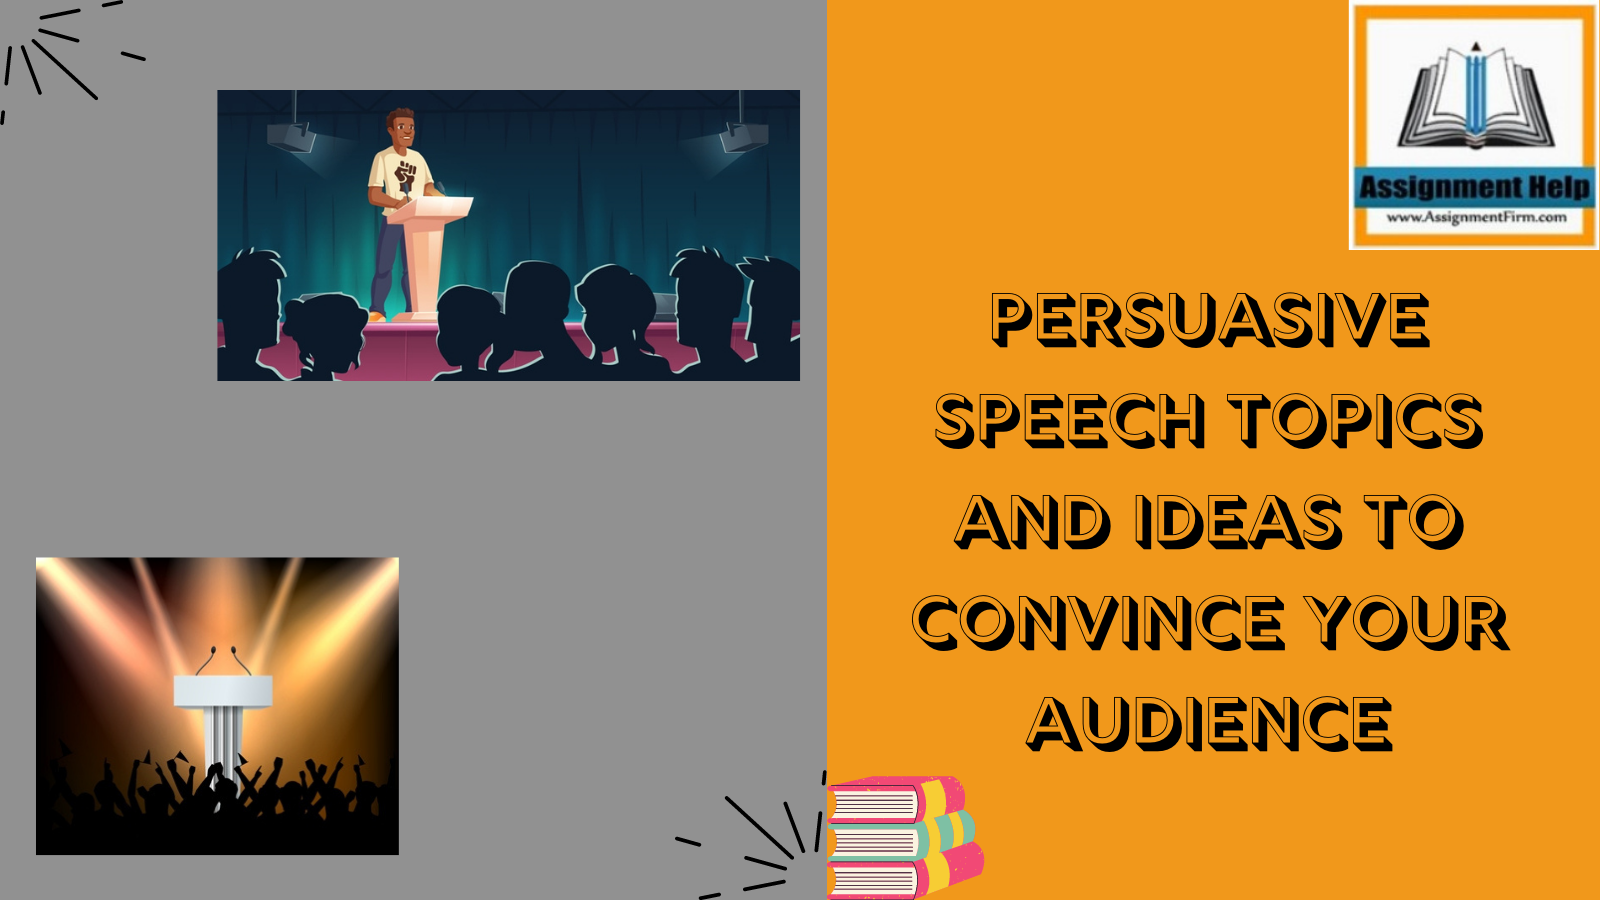 Article about 100+ Persuasive speech topics and ideas to convince your audience